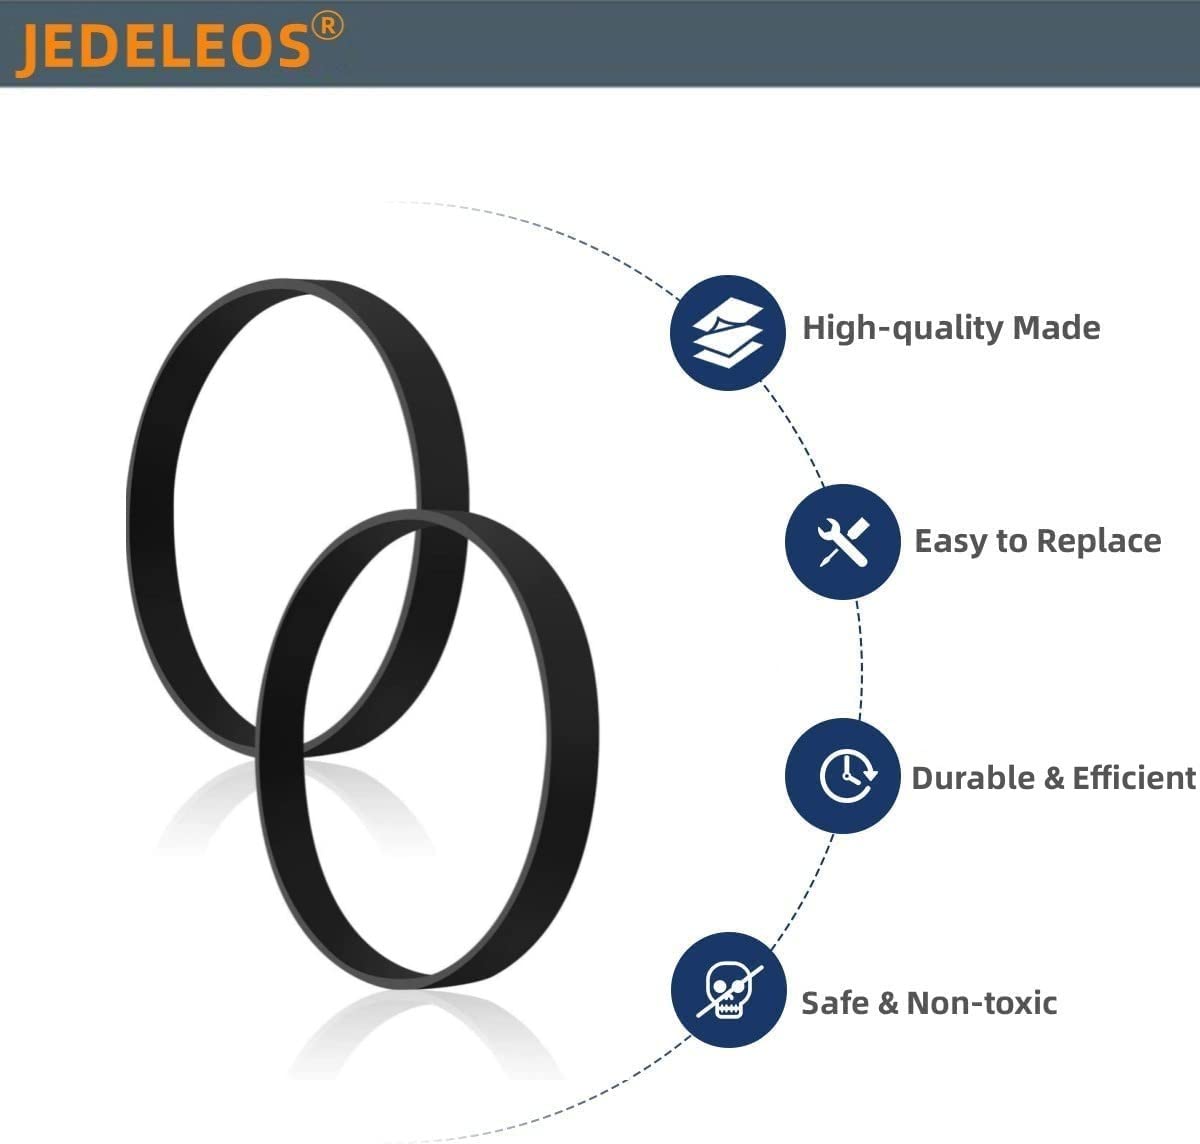 JEDELEOS Replacement Belts for Hoover High Performance / Elite Swivel XL Pet Upright Vacuum UH75200, UH75210, UH75250, UH75110, UH75100, UH75150, UH75160 Series (Pack of 2)